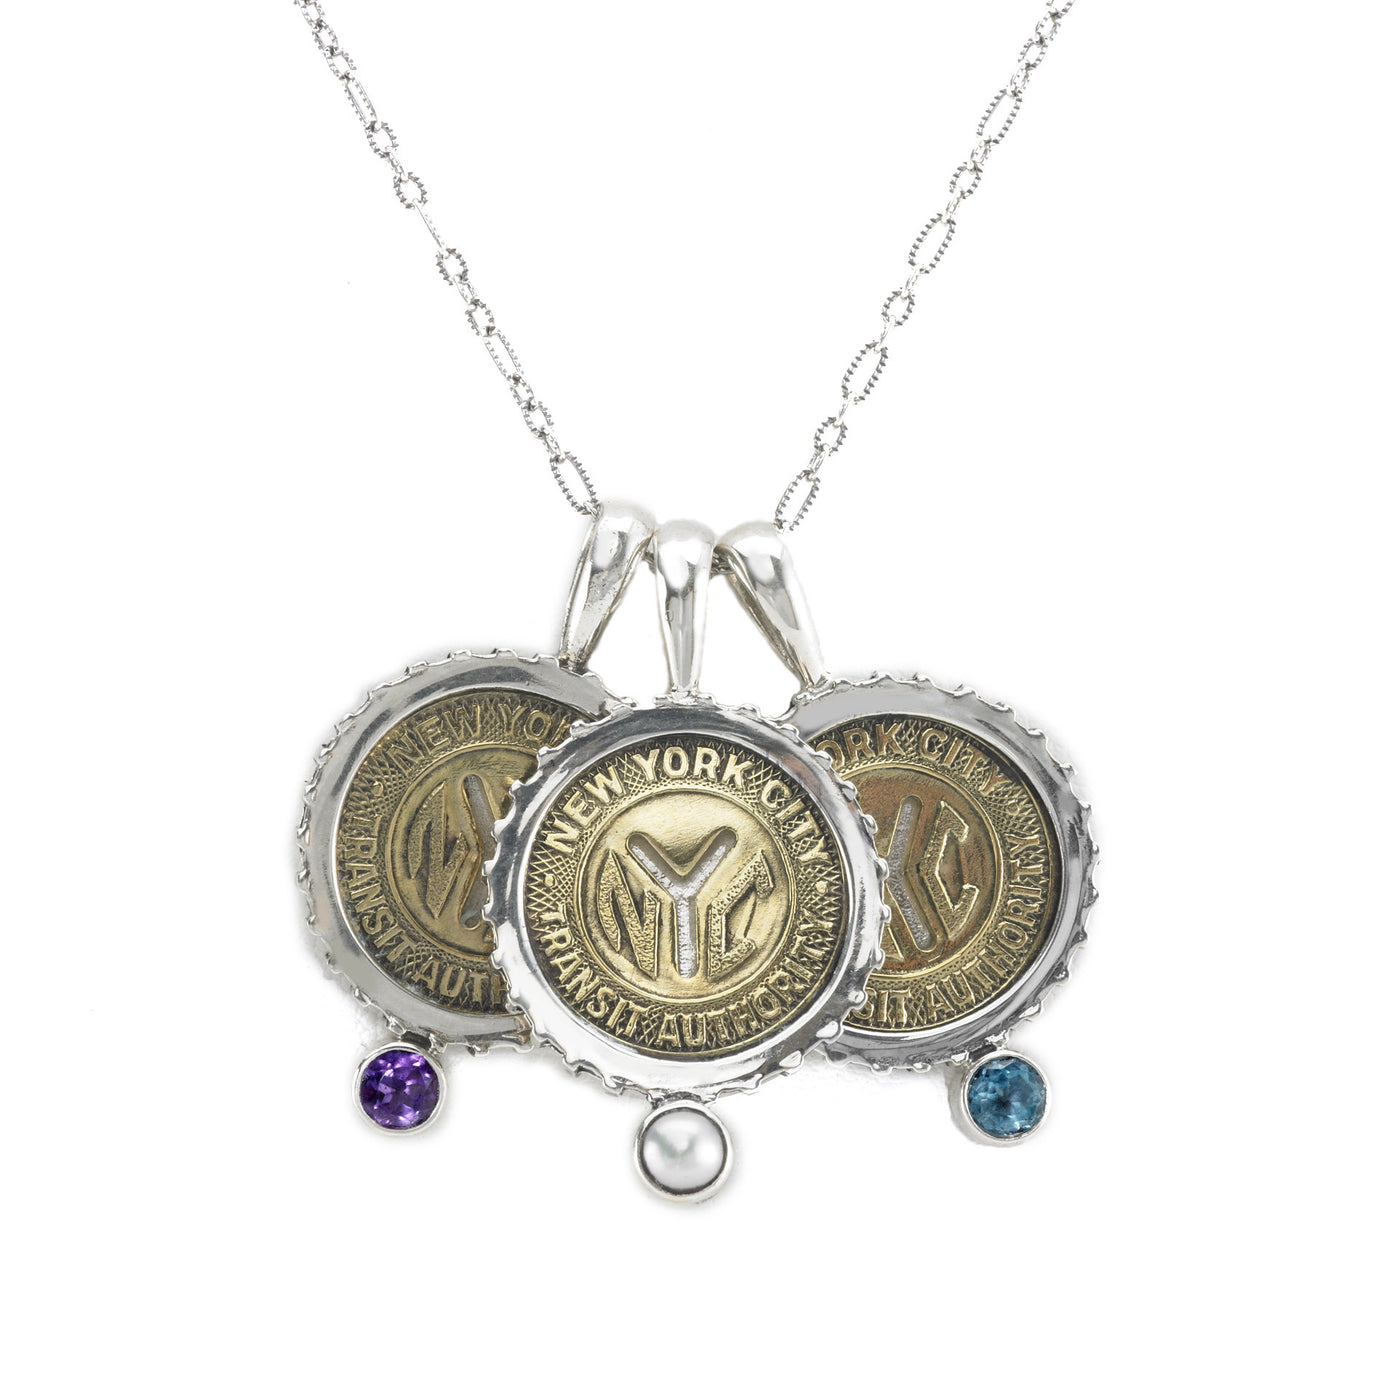 Birthstone NYC Authentic Subway Token White Topaz Sterling Silver Charm Necklace - Cynthia Gale New York - 2